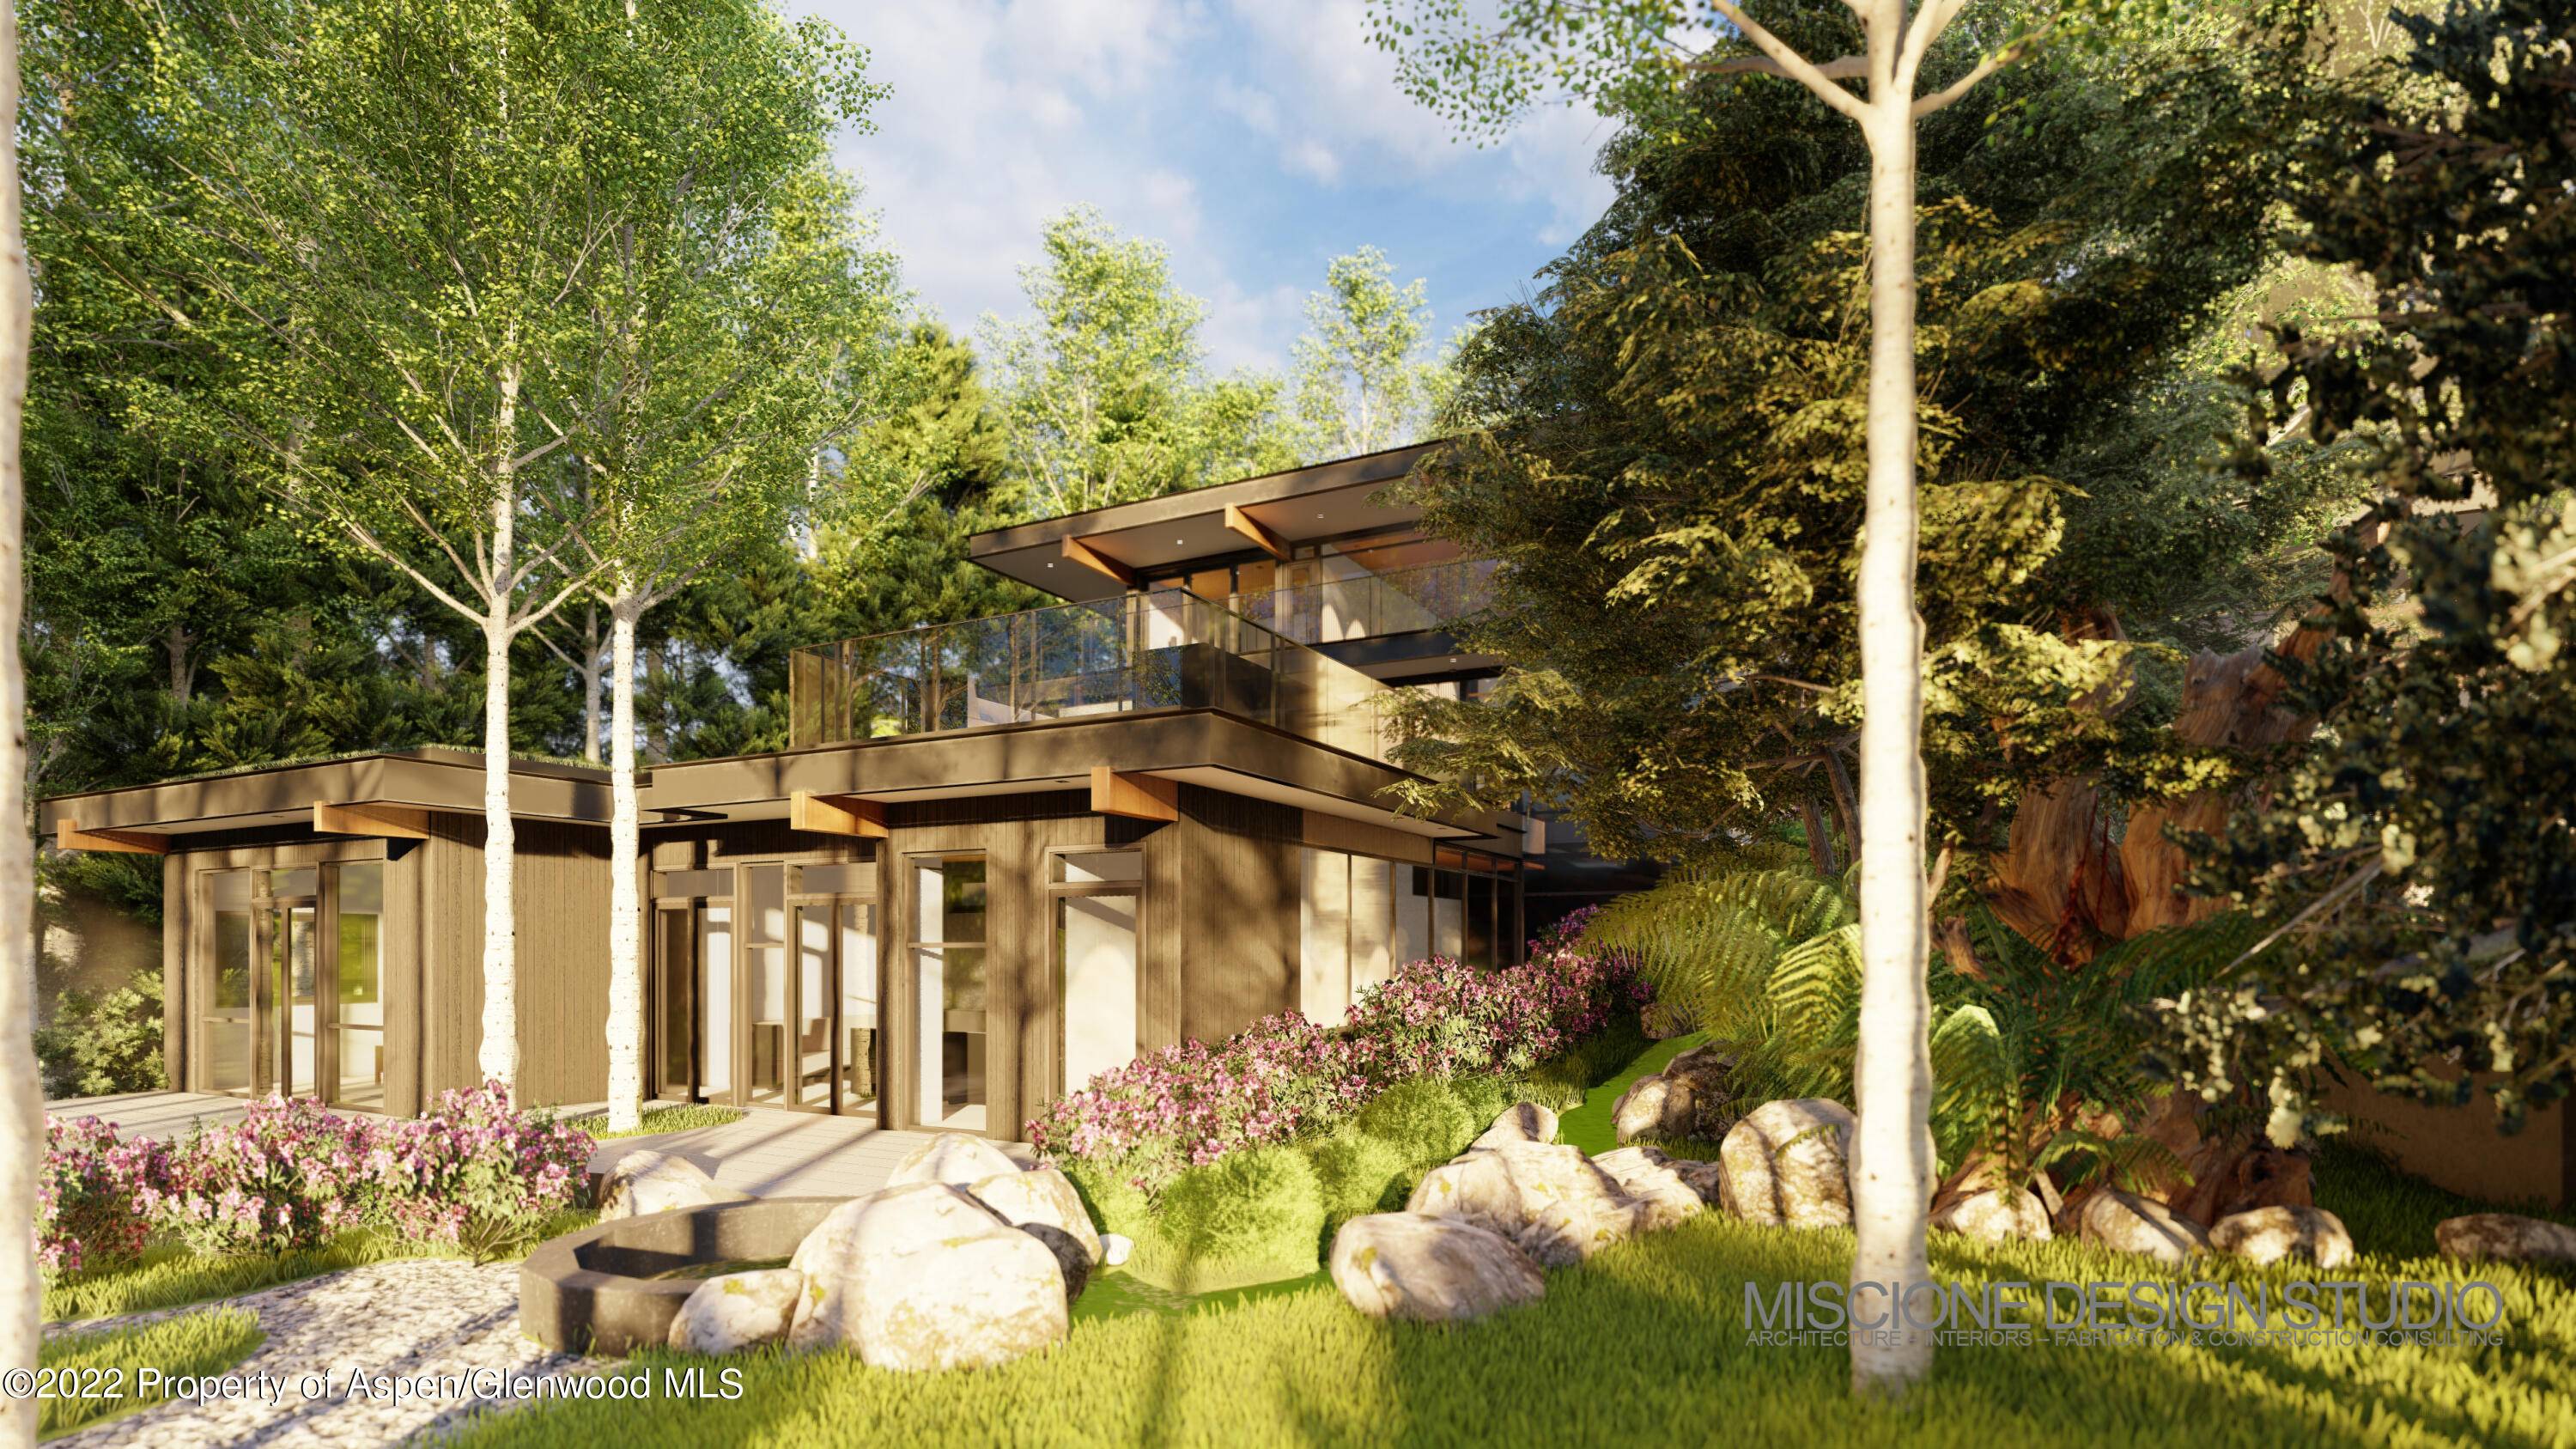 This classic Frank Lloyd Wright inspired house sits perfectly nestled in a mature Aspen grove, facing south, overlooking Aspen, Colorado, Ajax ski area, and the Rocky Mountain Elk Range.